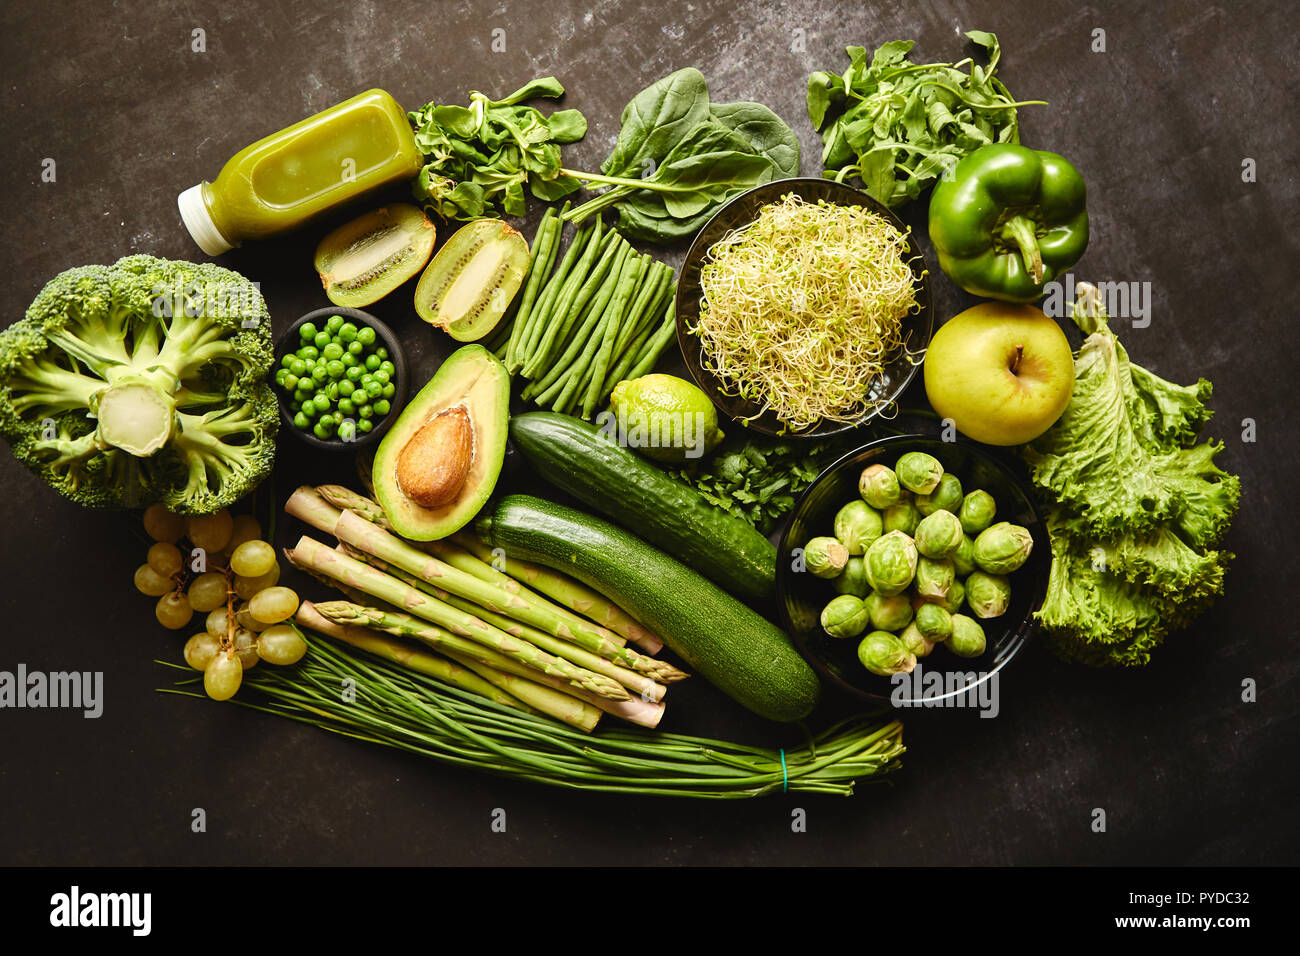 Green healthy food composition with avocado, broccoli, apple smoothie, cucomber, asparagus, kiwi and bean. Placed on dark background. Top view. Stock Photo